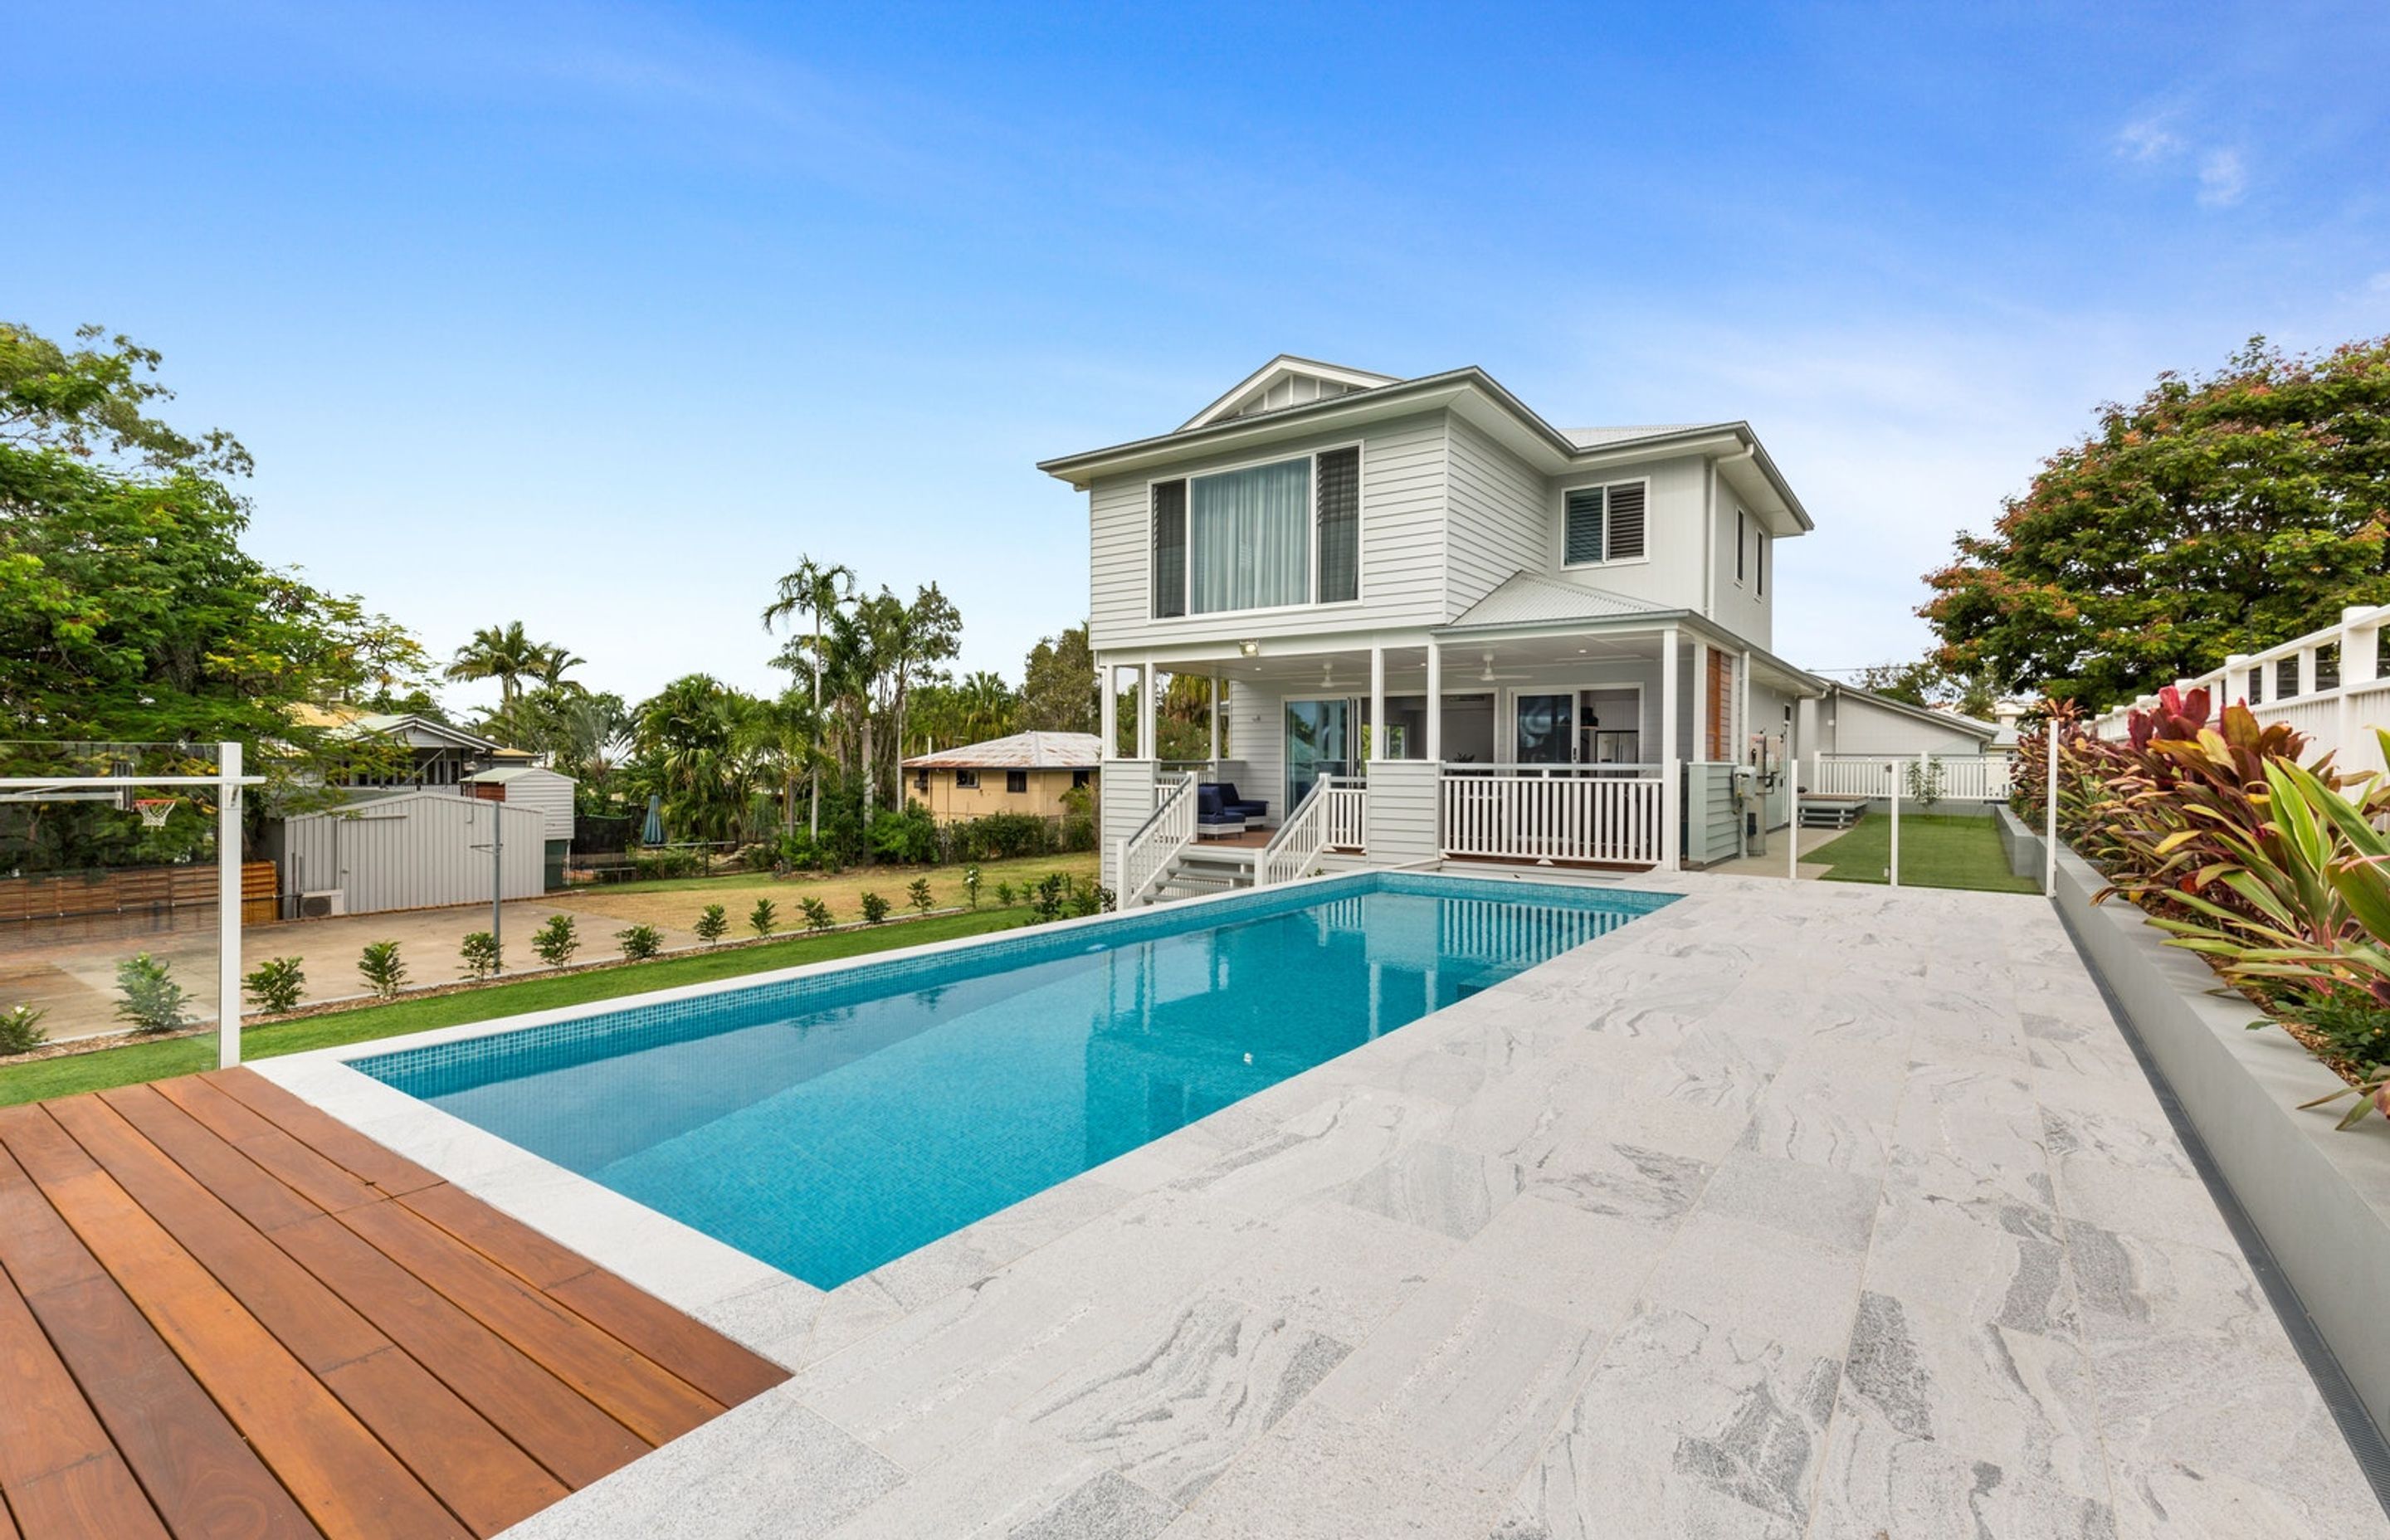  House of the Year - Queensland Master Builders 2019